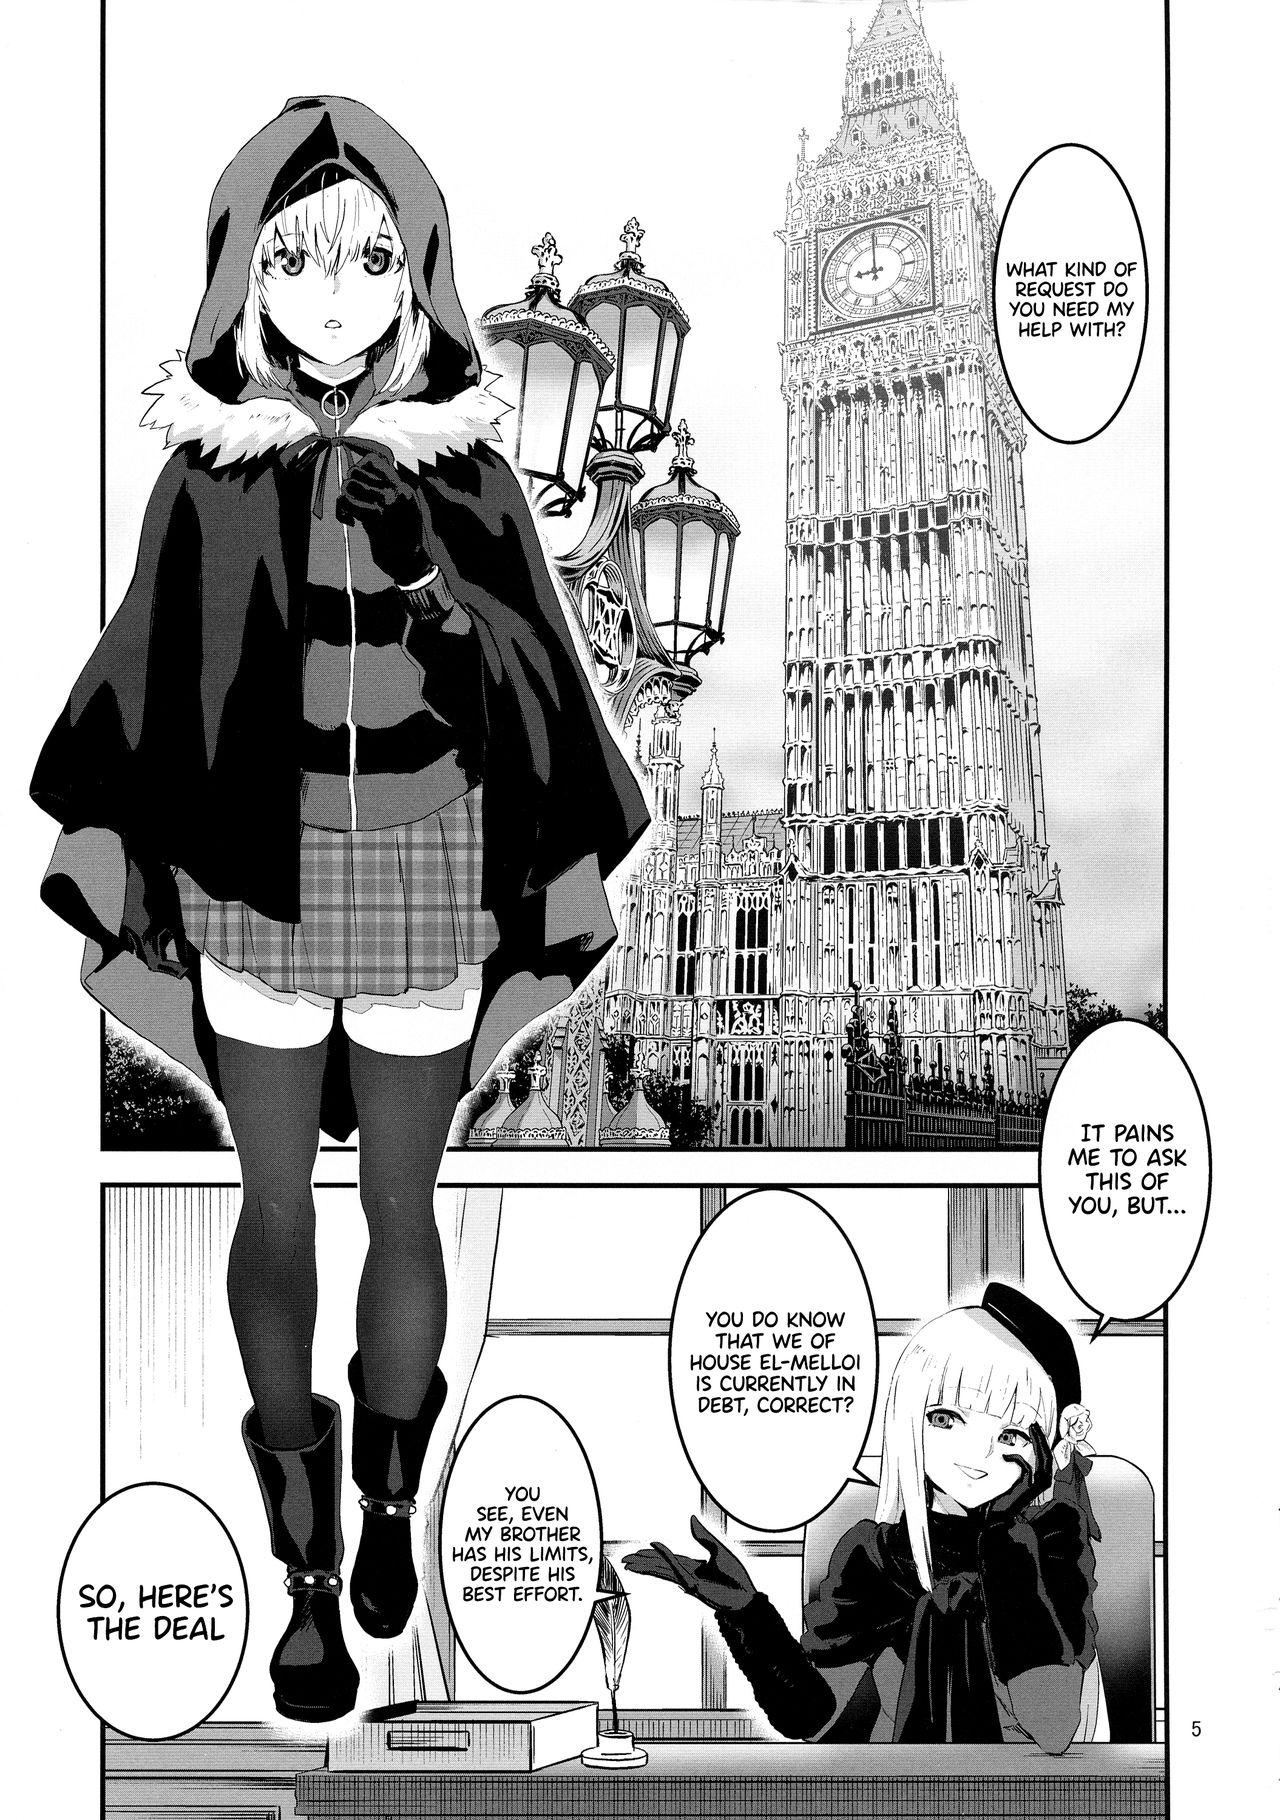 Fucking Sex Taking Advantage of Gray-chan Weakness, We Graduated from our Virginity. - Lord el-melloi ii sei no jikenbo Spank - Page 5